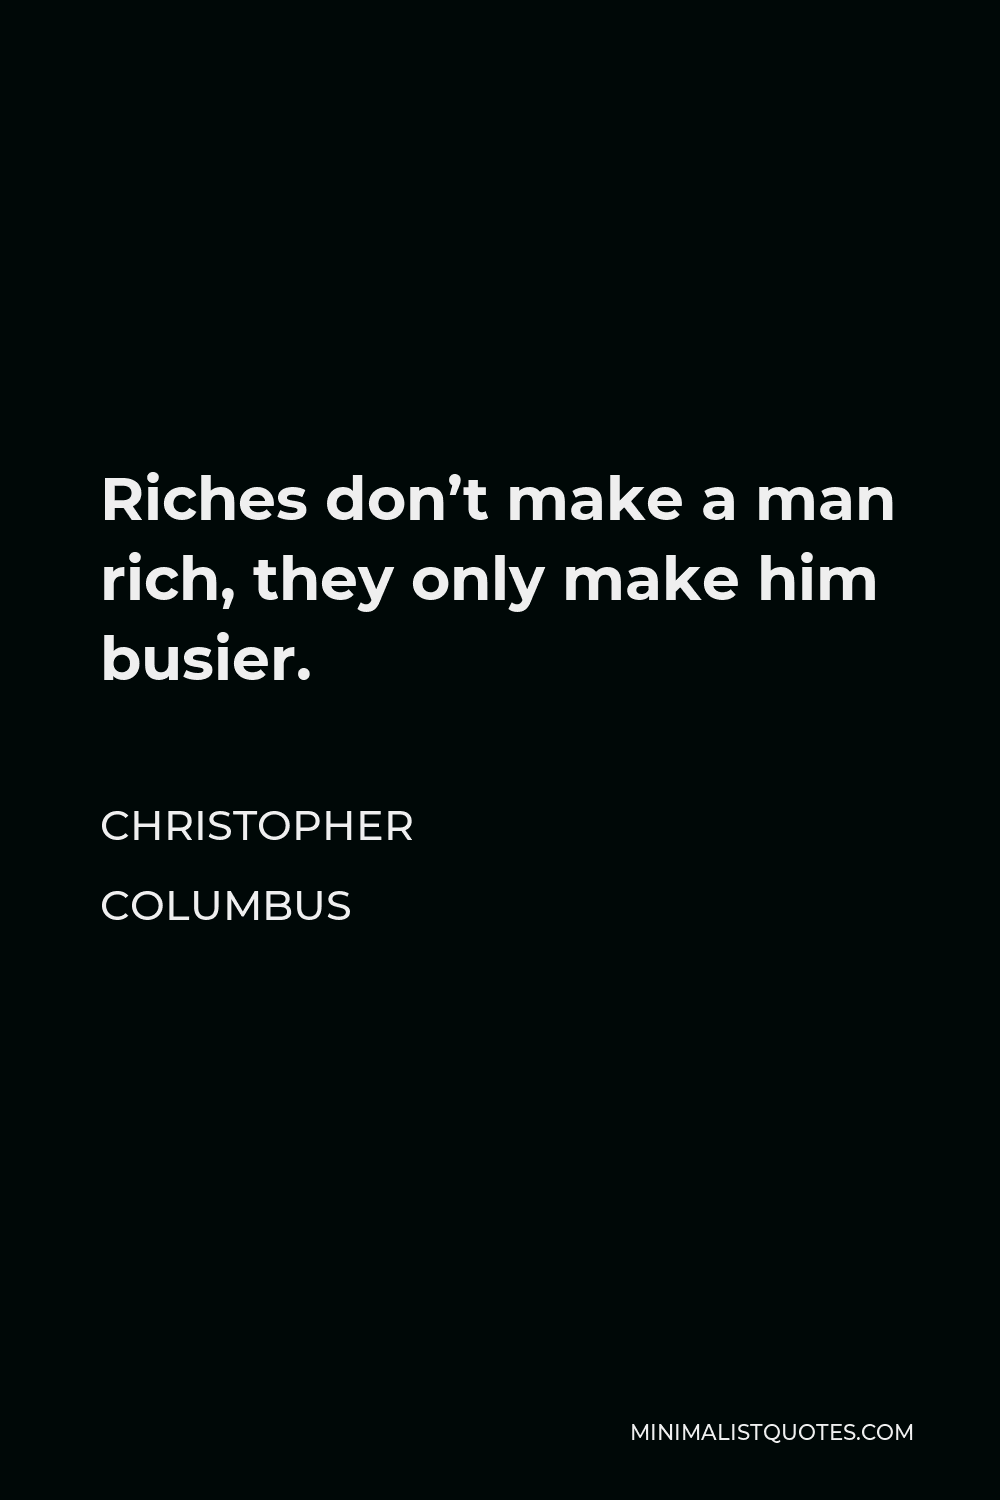 Christopher Columbus Quote: Riches don't make a man rich, they only ...